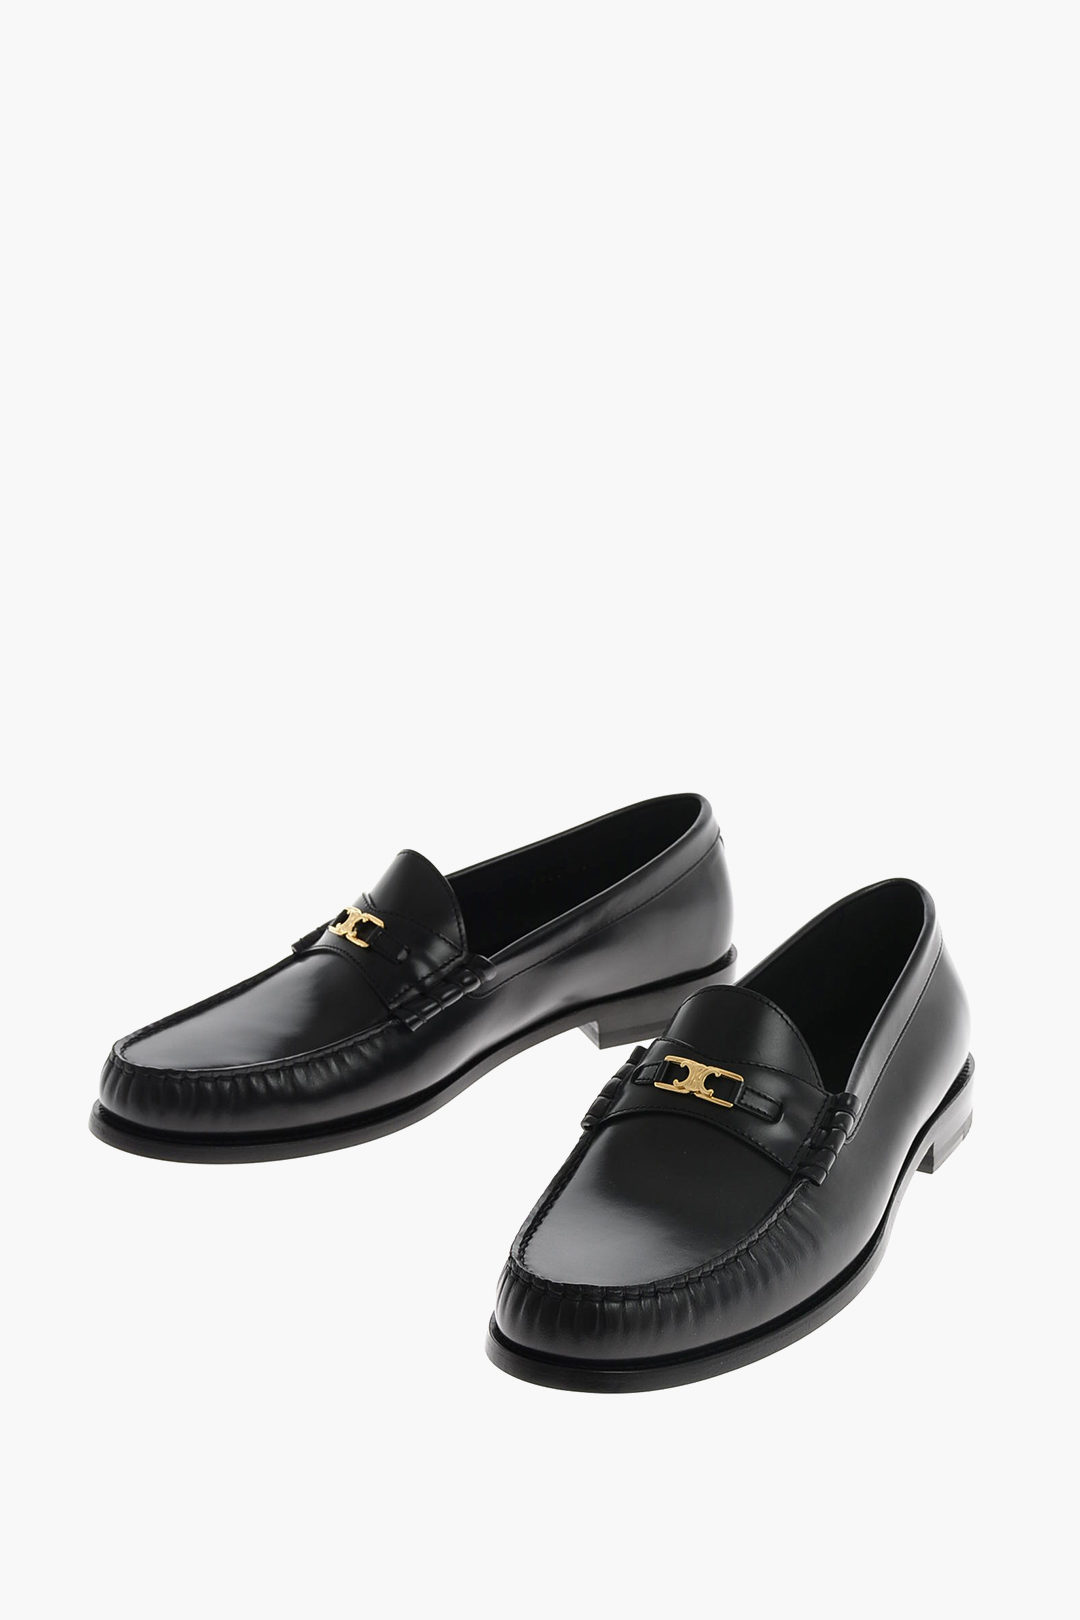 celine mens loafers, massive reduction UP TO 75% OFF - research.sjp.ac.lk